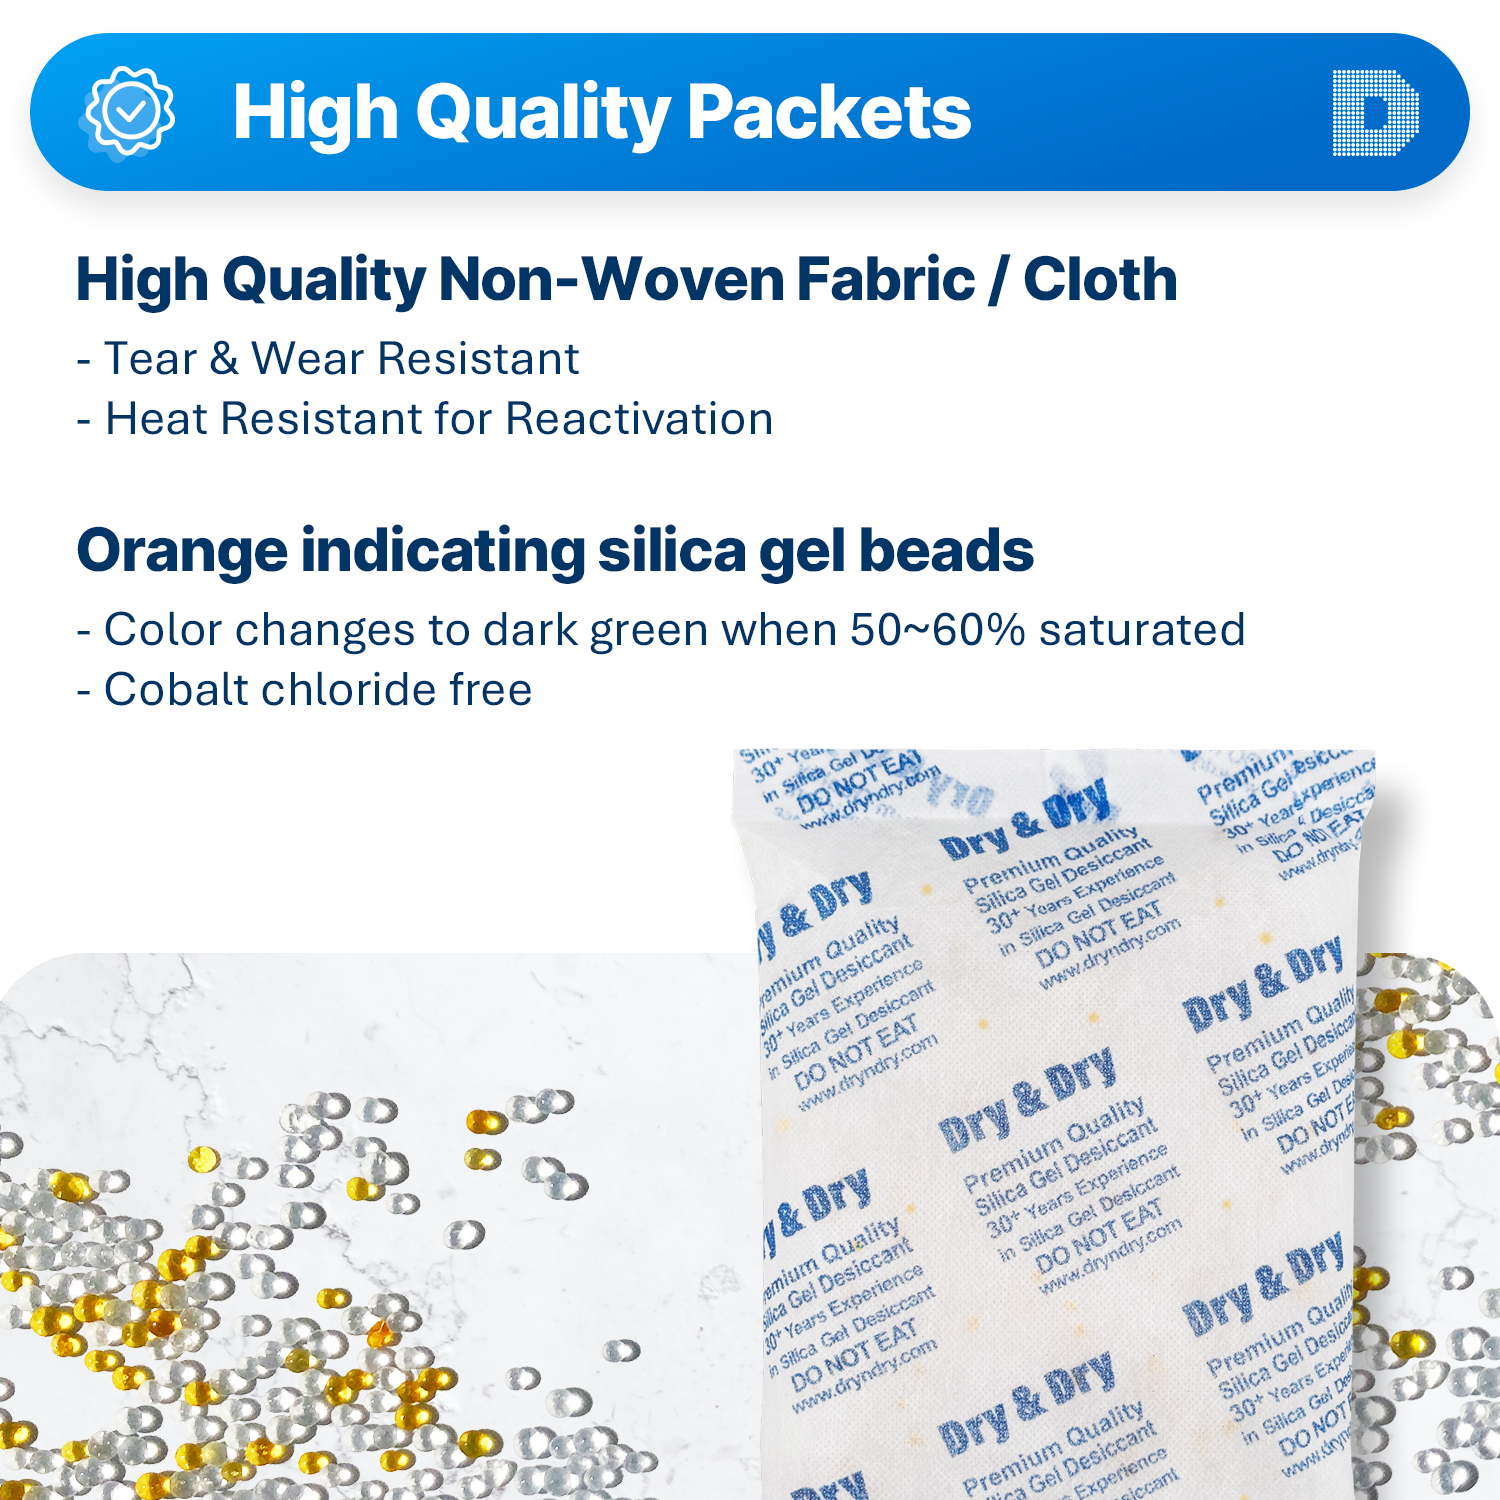 500 Gram [40 Packs] Non-Woven Fabric (Cloth) Food Safe Orange Indicating(Orange to Dark Green) Mixed Silica Gel Packets - Rechargeable(FDA Compliant)